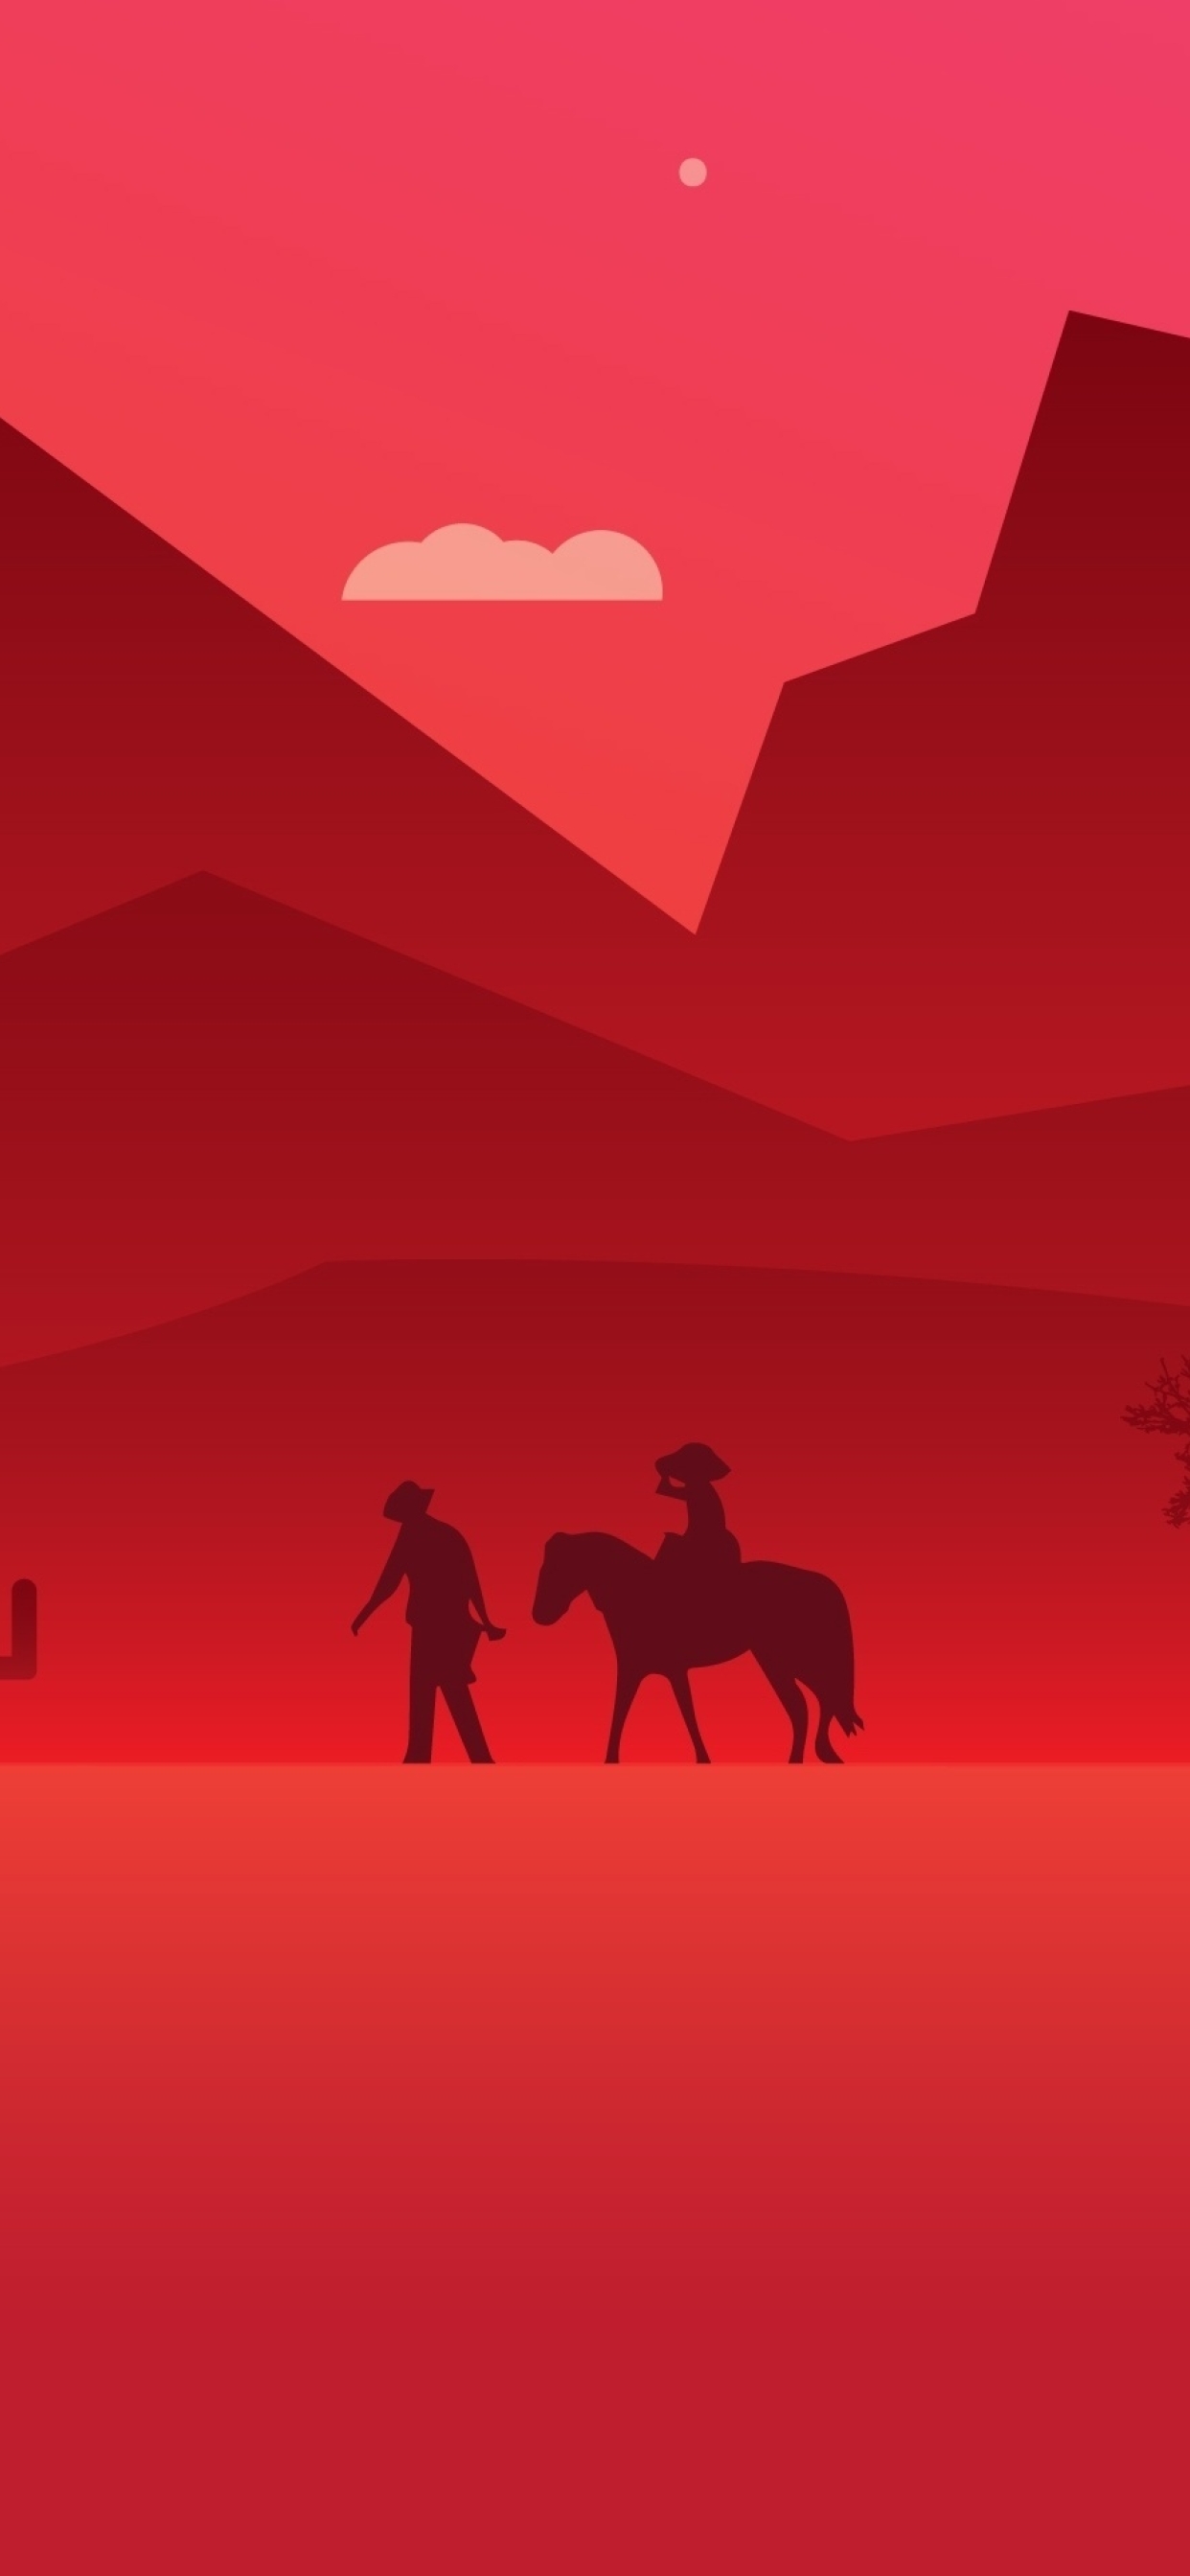 1242x2688 Red Dead Redemption 2 Minimal Game 19 Iphone Xs